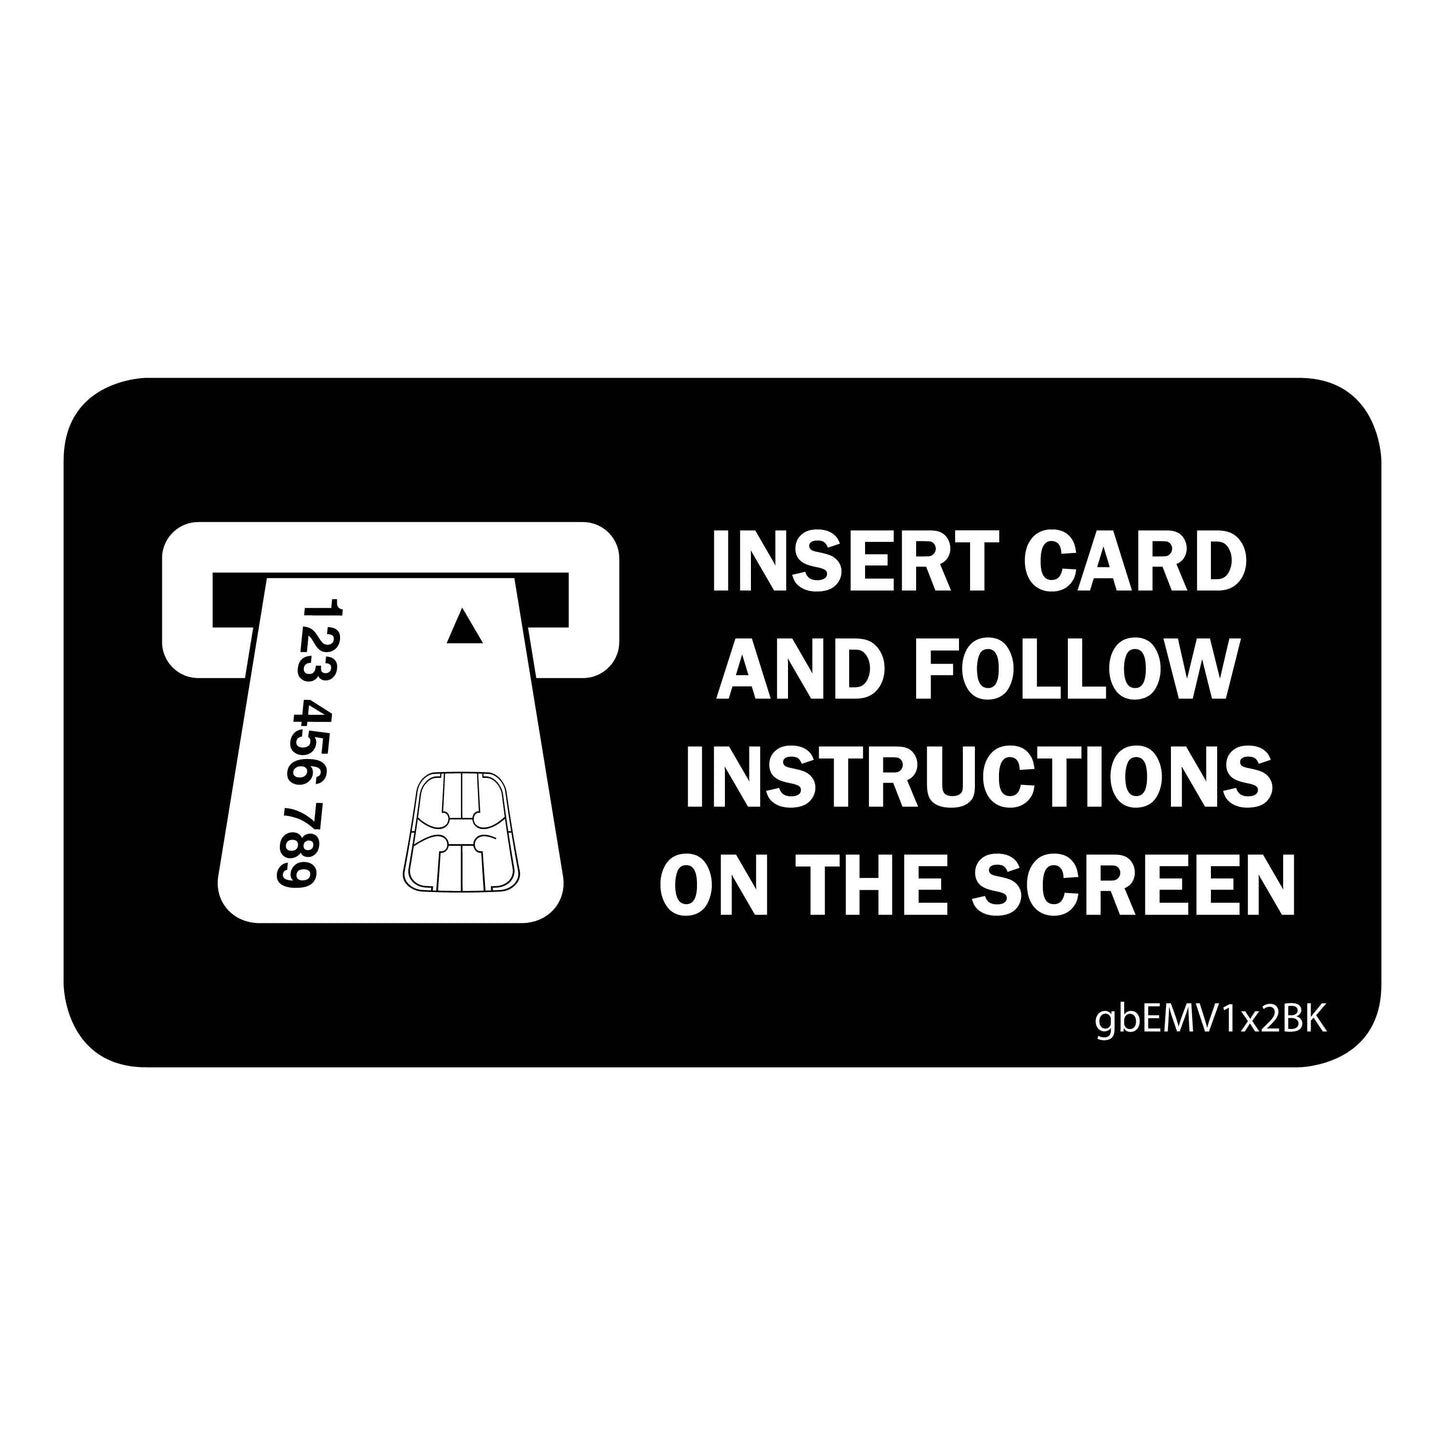 EMV Instruction Decal. 2.25 inches by 1 inch in size.